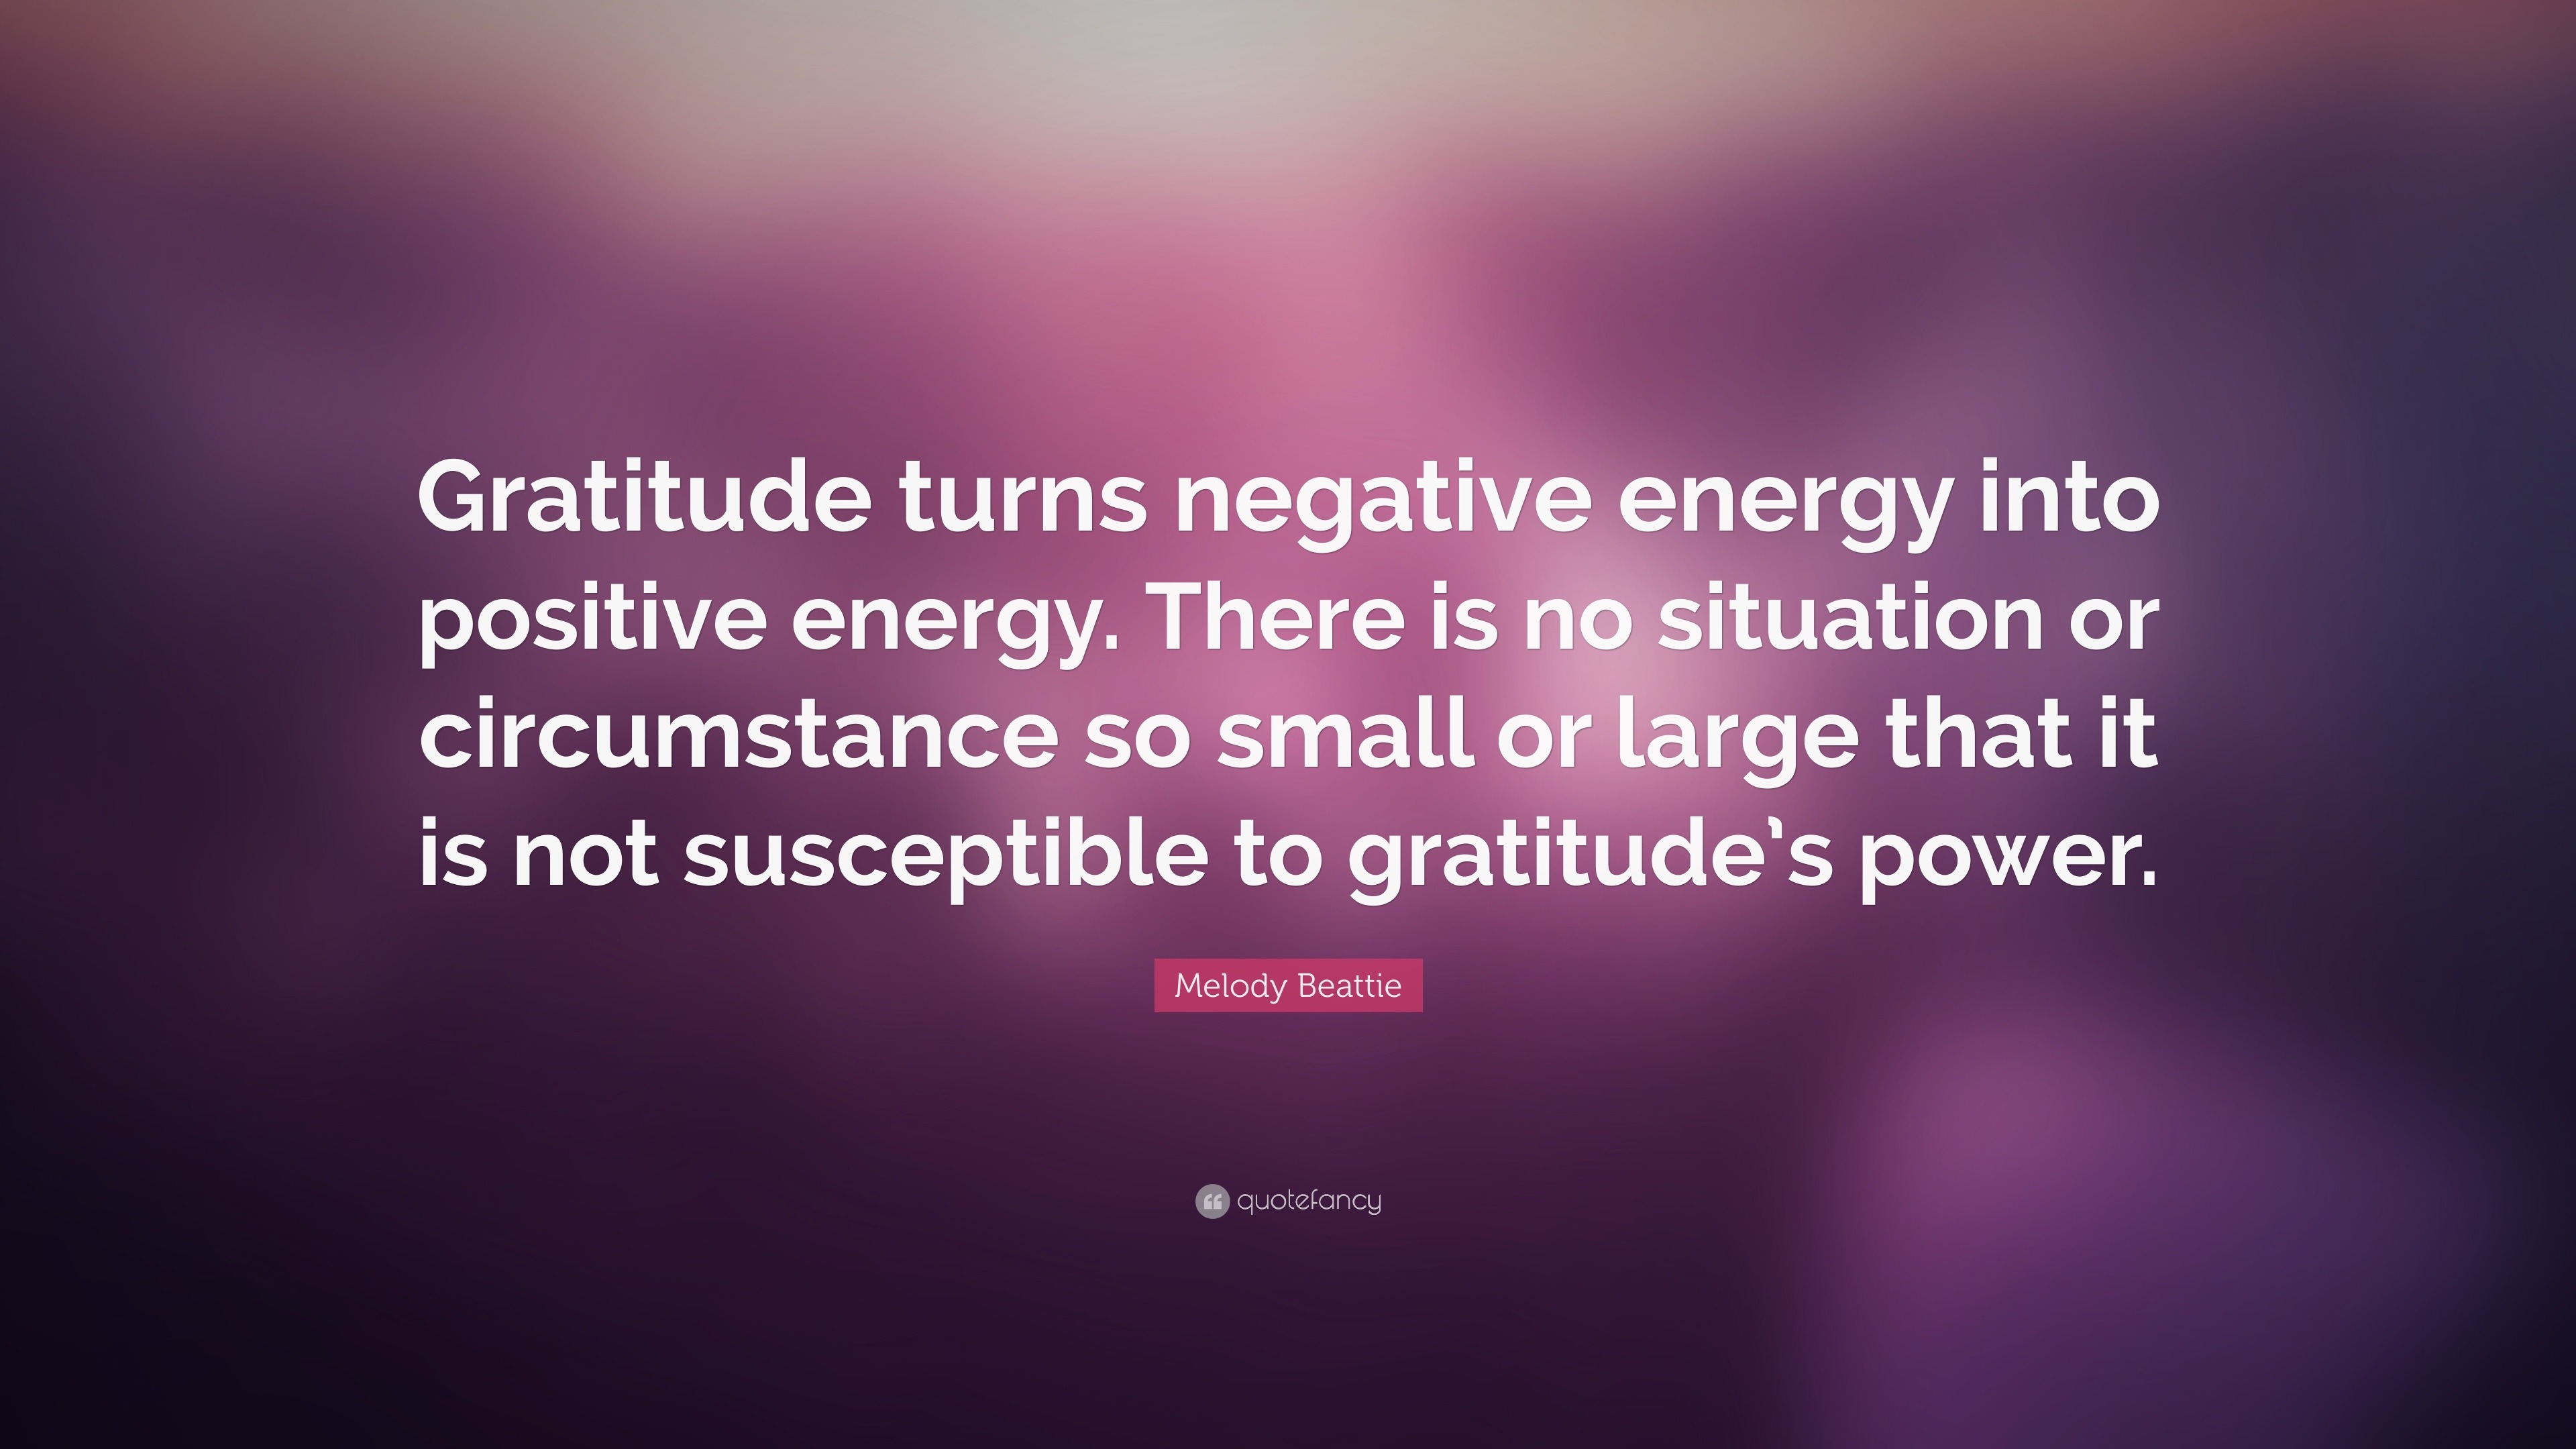 positive energy quote images